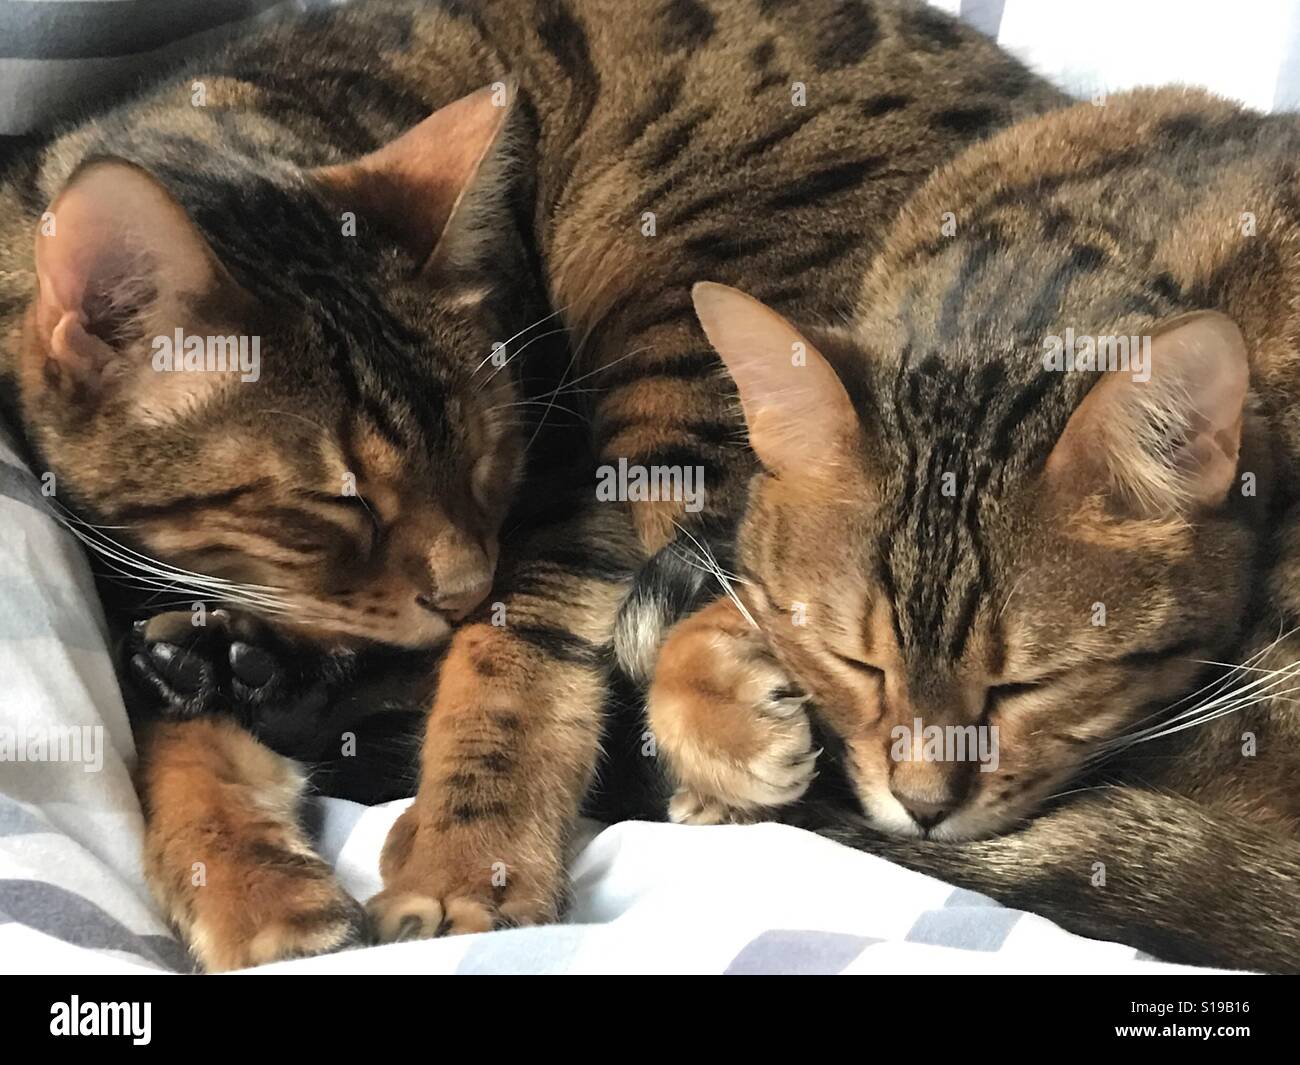 Two pedigree Bengal cats asleep, curled up together. Stock Photo